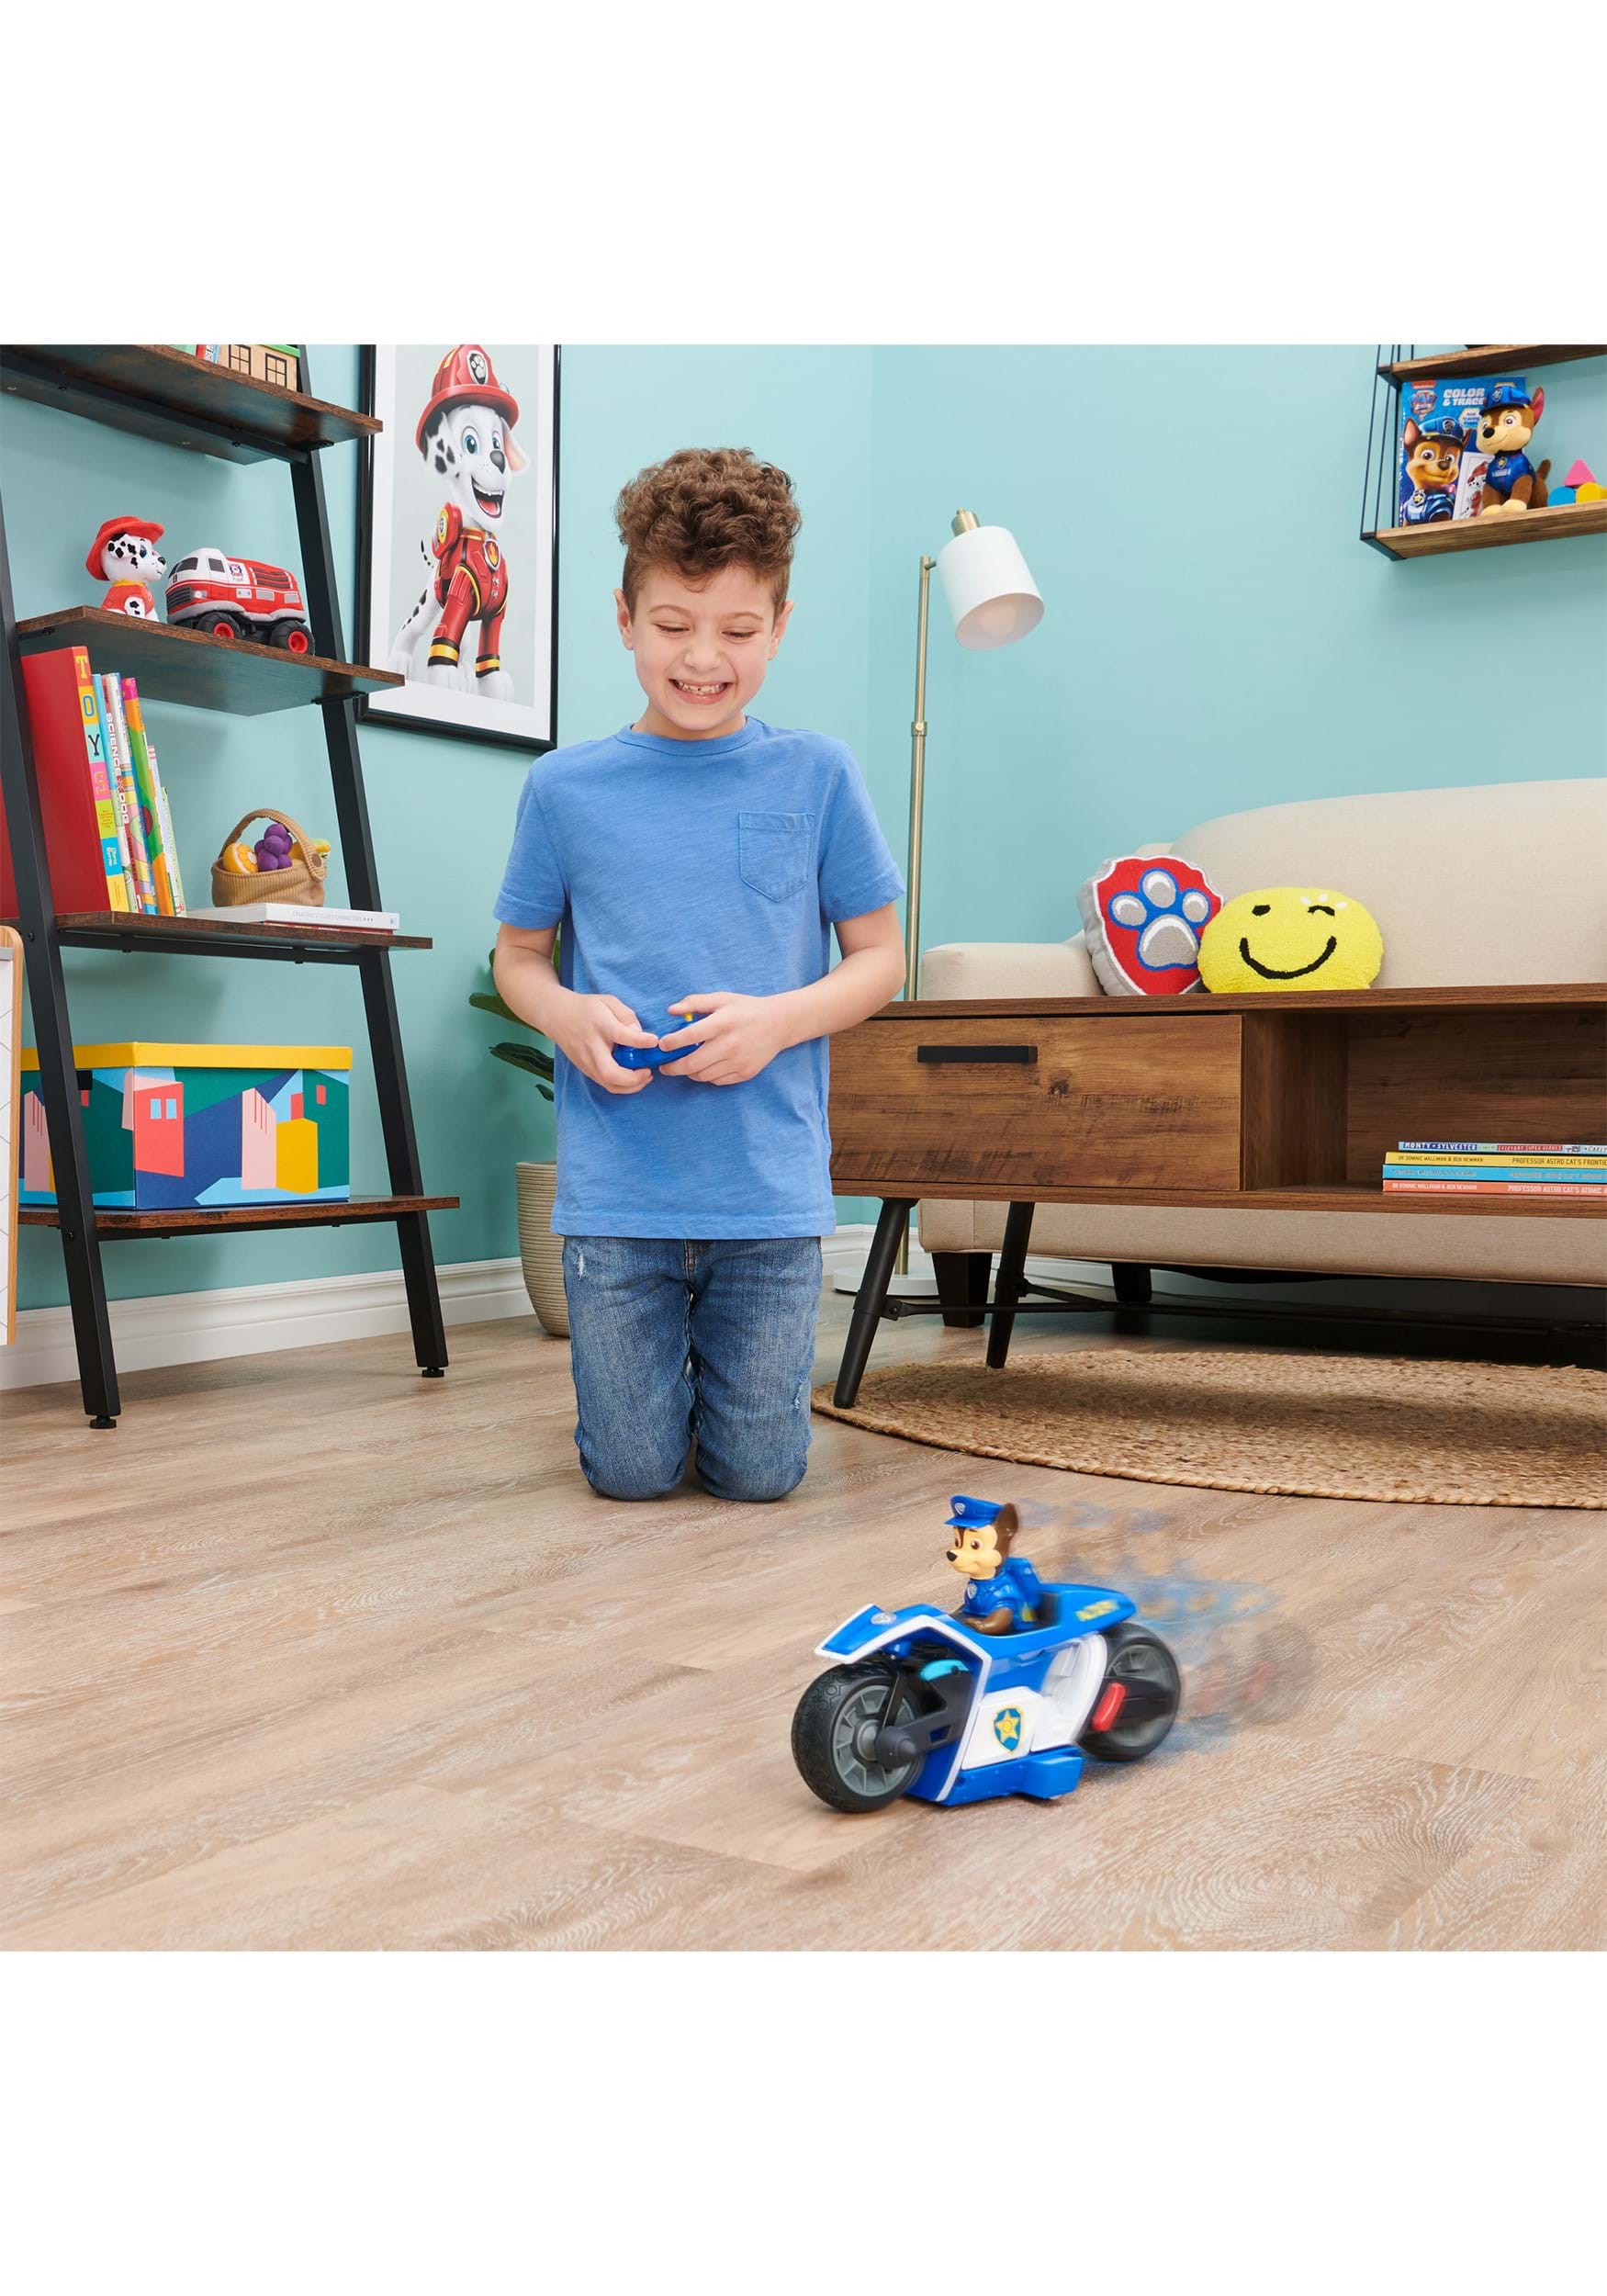 PAW PATROL Chase RC Movie Motorcycle Remote Control Car Kids Toys for Ages 3 and up 